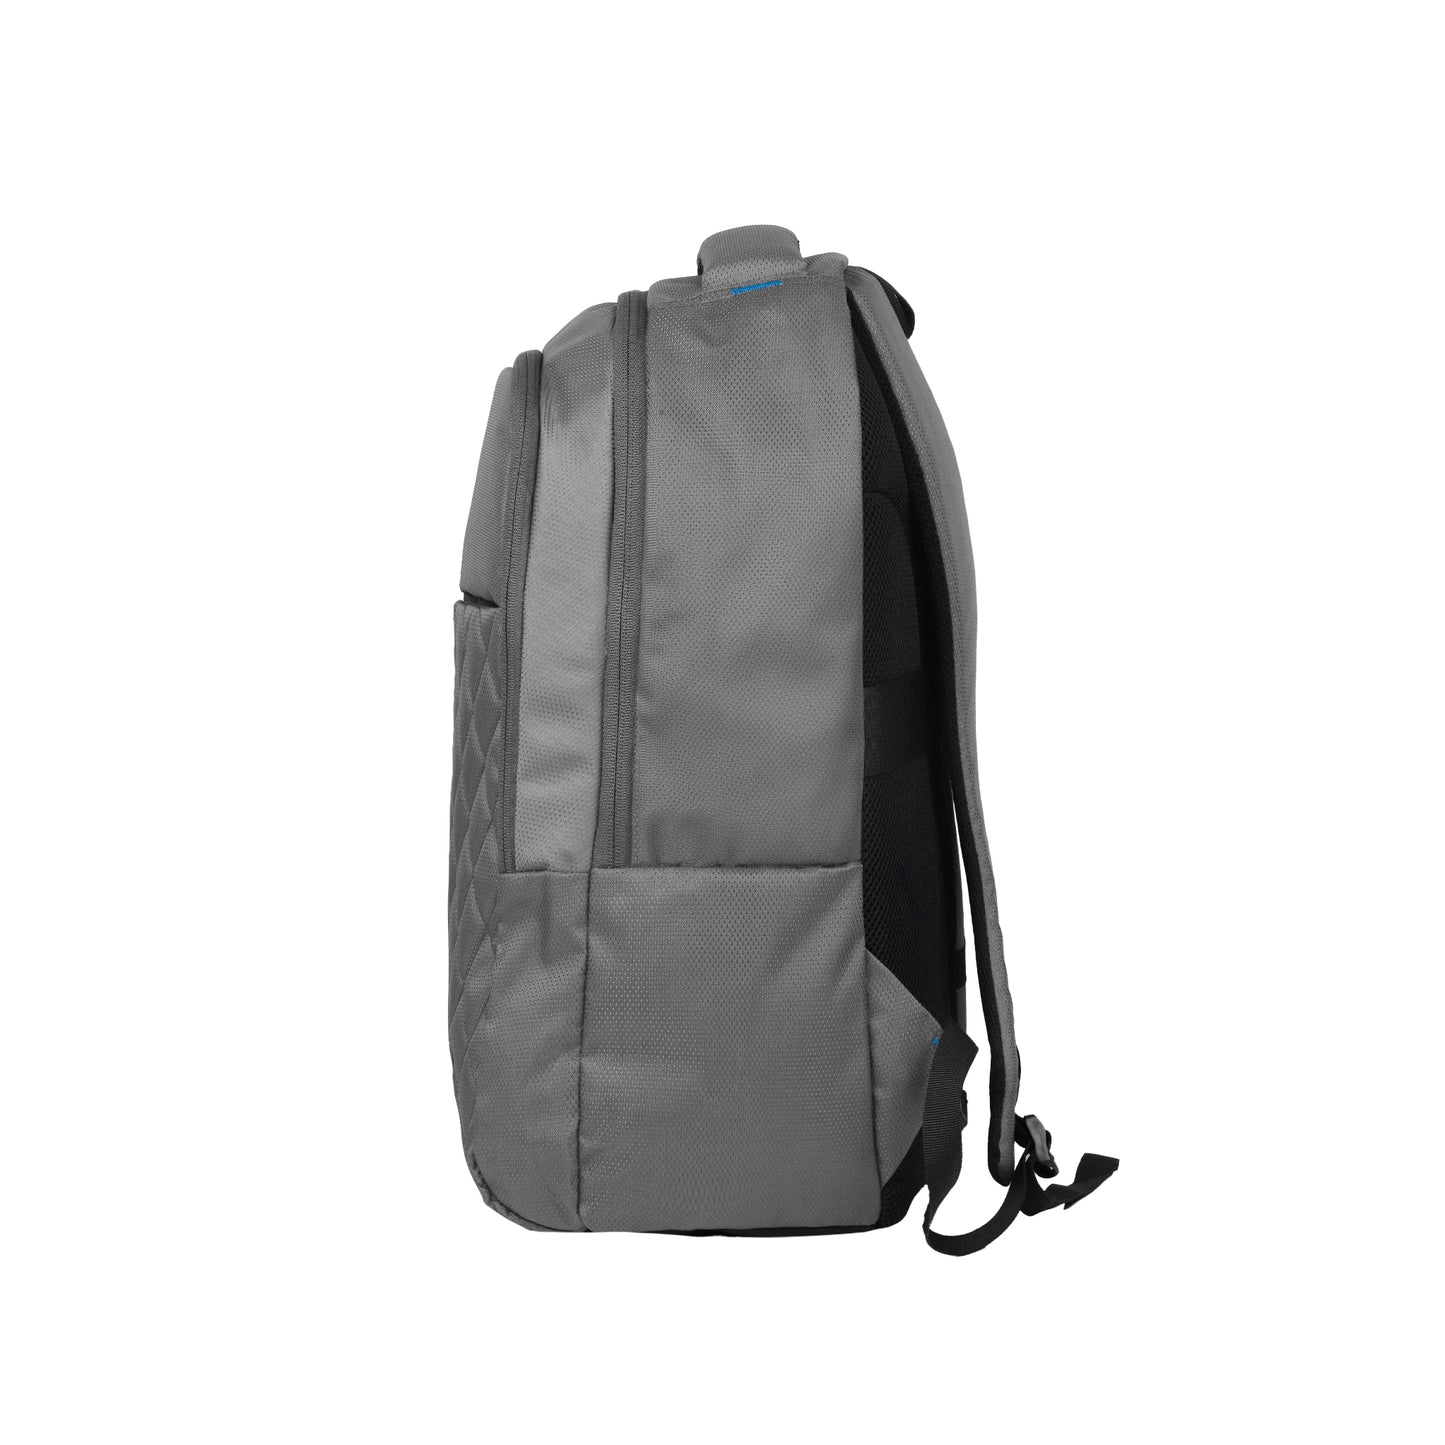 Coach 26L Grey Laptop Backpack with Rain Cover